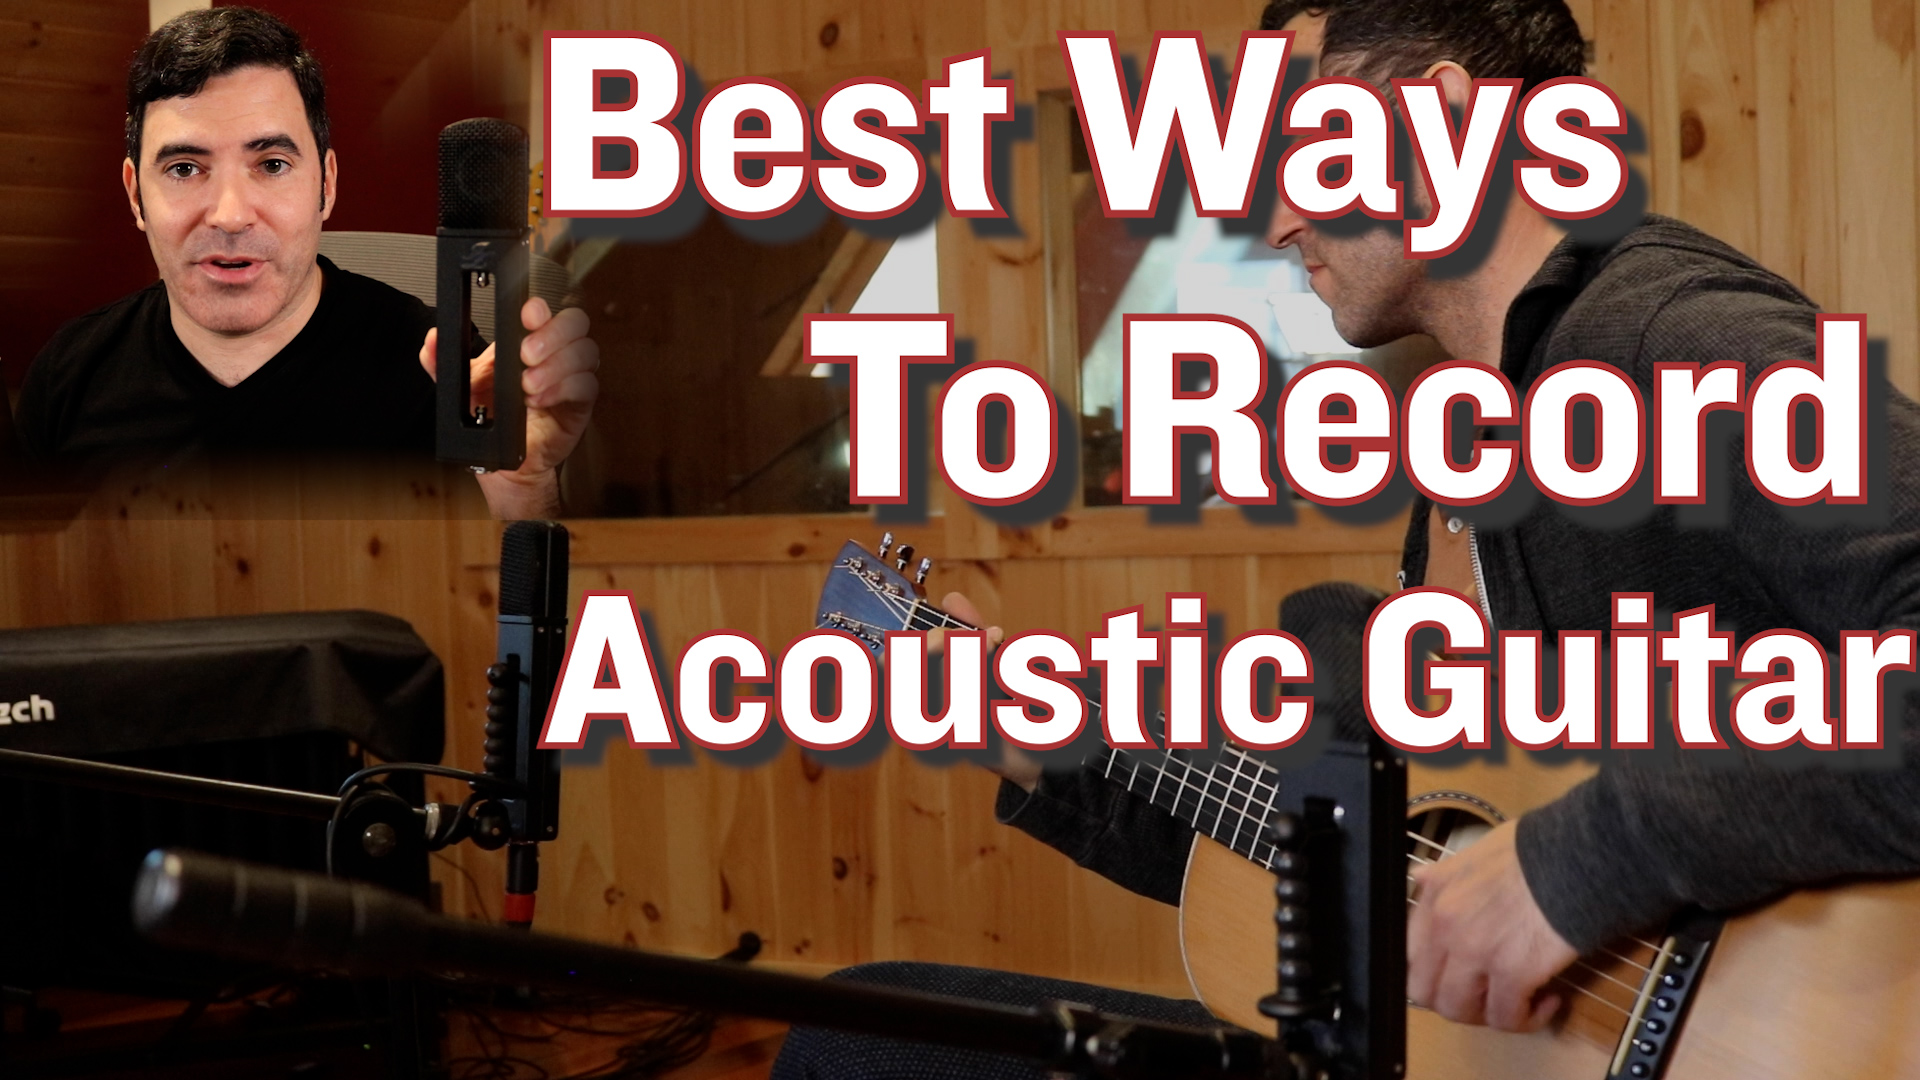 Best Mic Techniques for Recording Acoustic Guitar (Stereo and Mono)